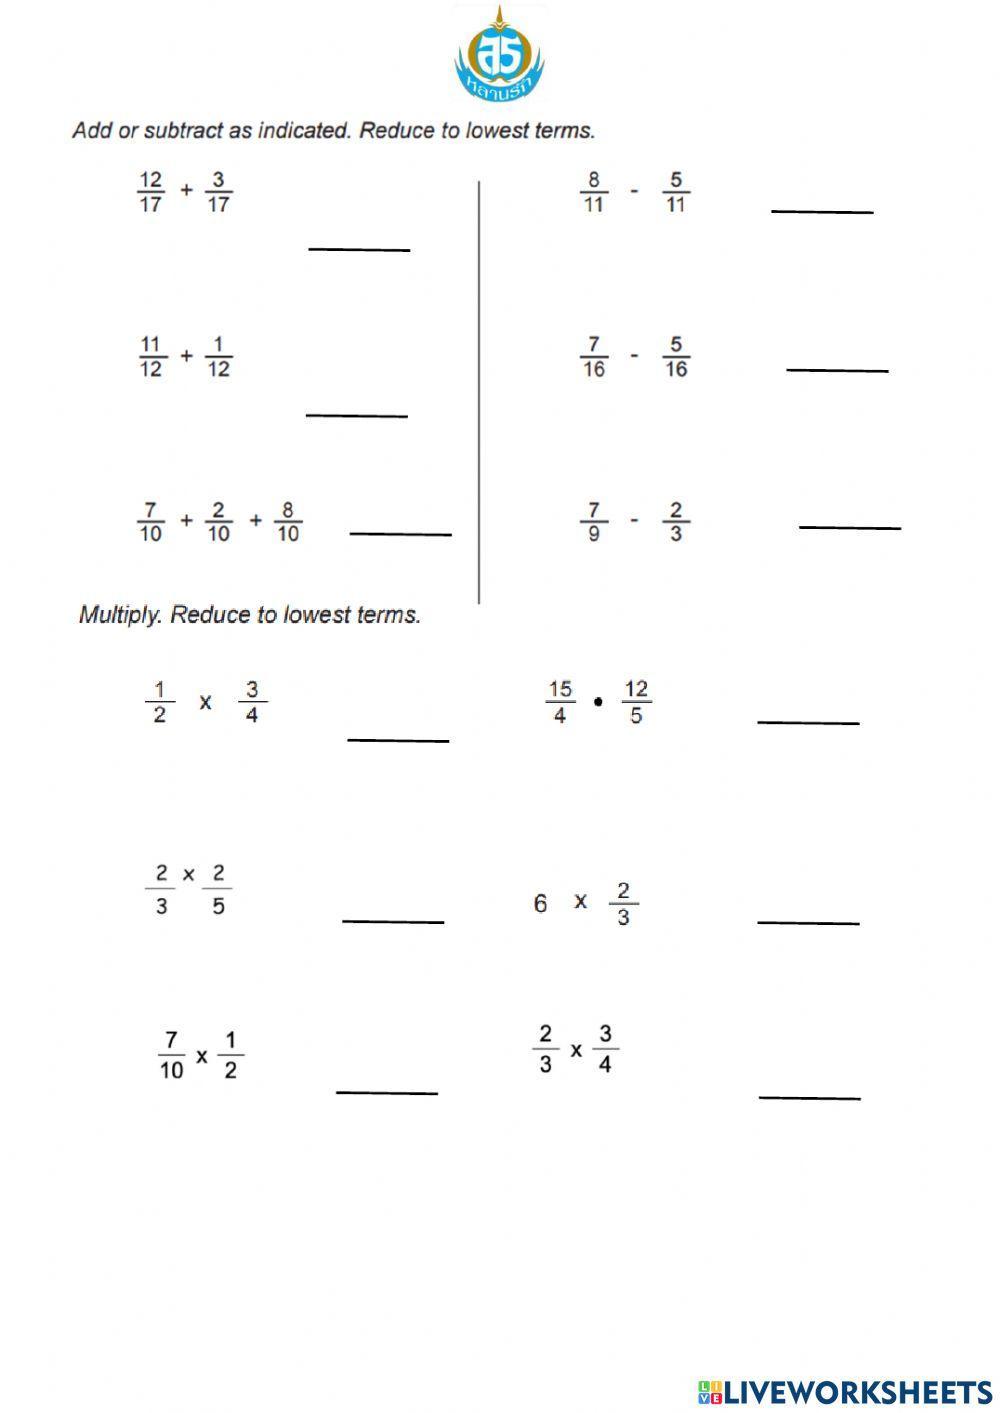 Add, subtract, multiply, or divide fractions